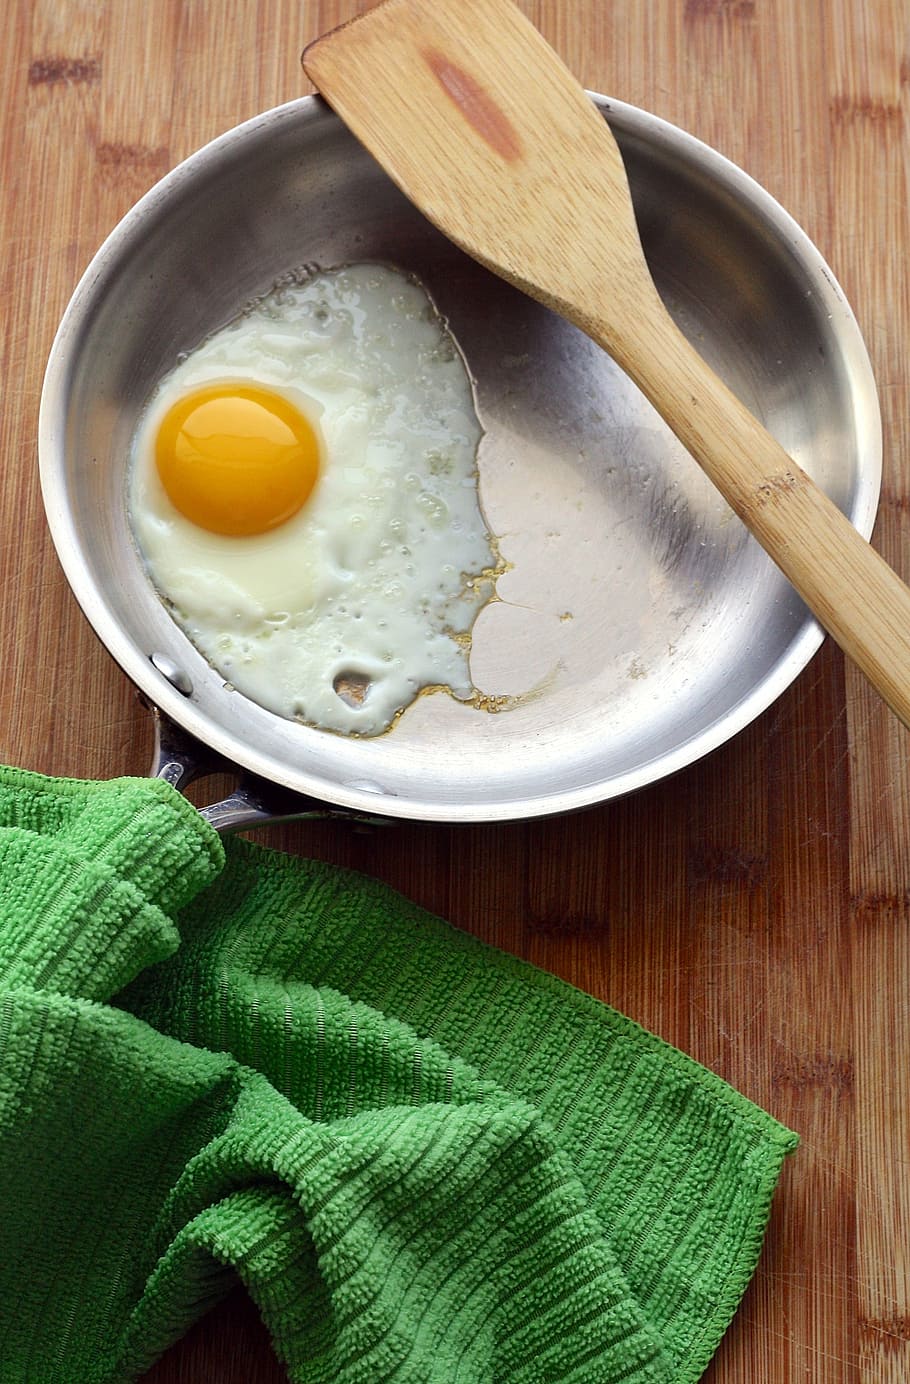 fried, egg, round, gray, frying, pan, brown, wooden, ladle, eggs